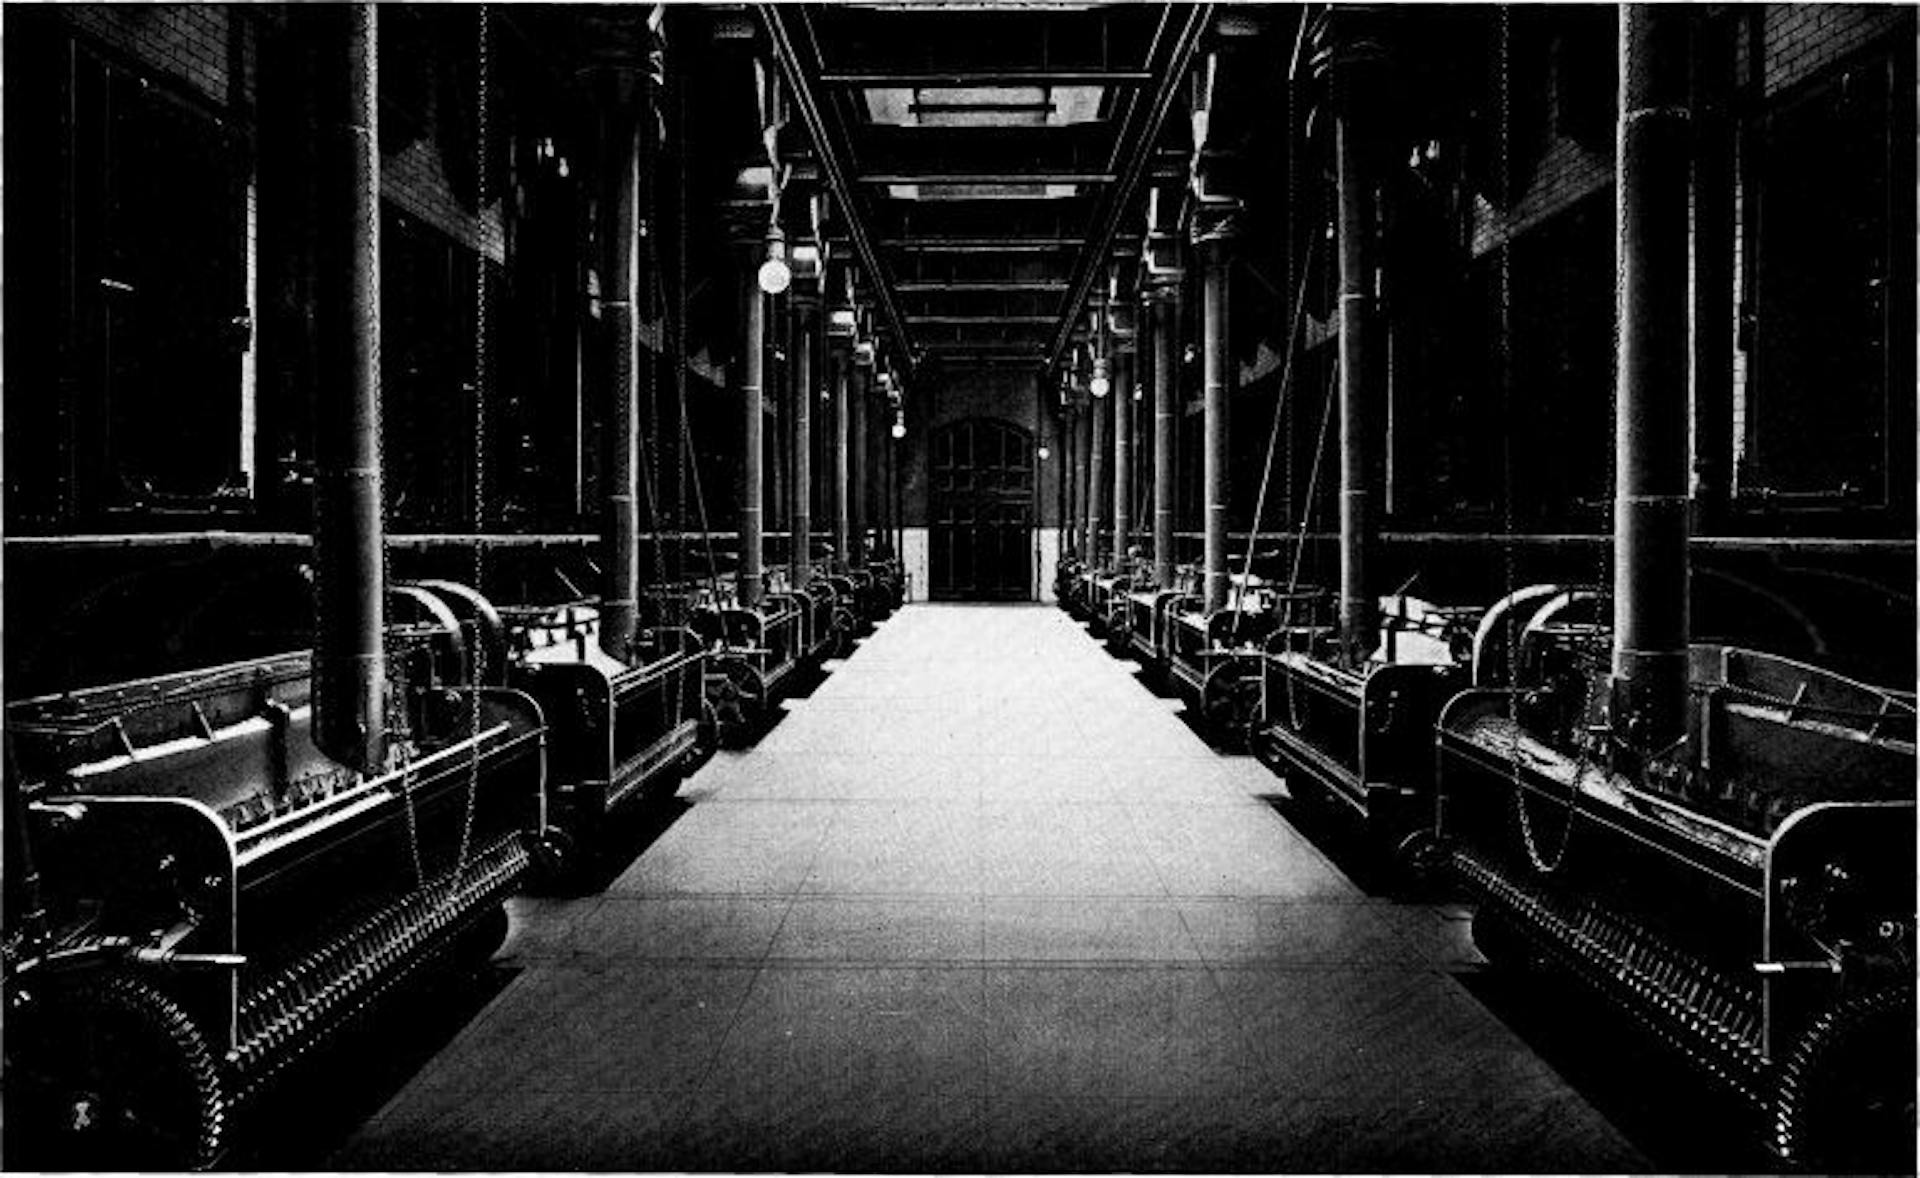 Two Units of 8128 Horse Power of Babcock & Wilcox Boilers and Superheaters at the Fisk Street Station of the Commonwealth Edison Co., Chicago, Ill., 50,400 Horse Power being Installed in this Station. The Commonwealth Edison Co. Operates in its Various Stations a Total of 86,000 Horse Power of Babcock & Wilcox Boilers, all Fitted with Babcock & Wilcox Superheaters and Equipped with Babcock & Wilcox Chain Grate Stokers